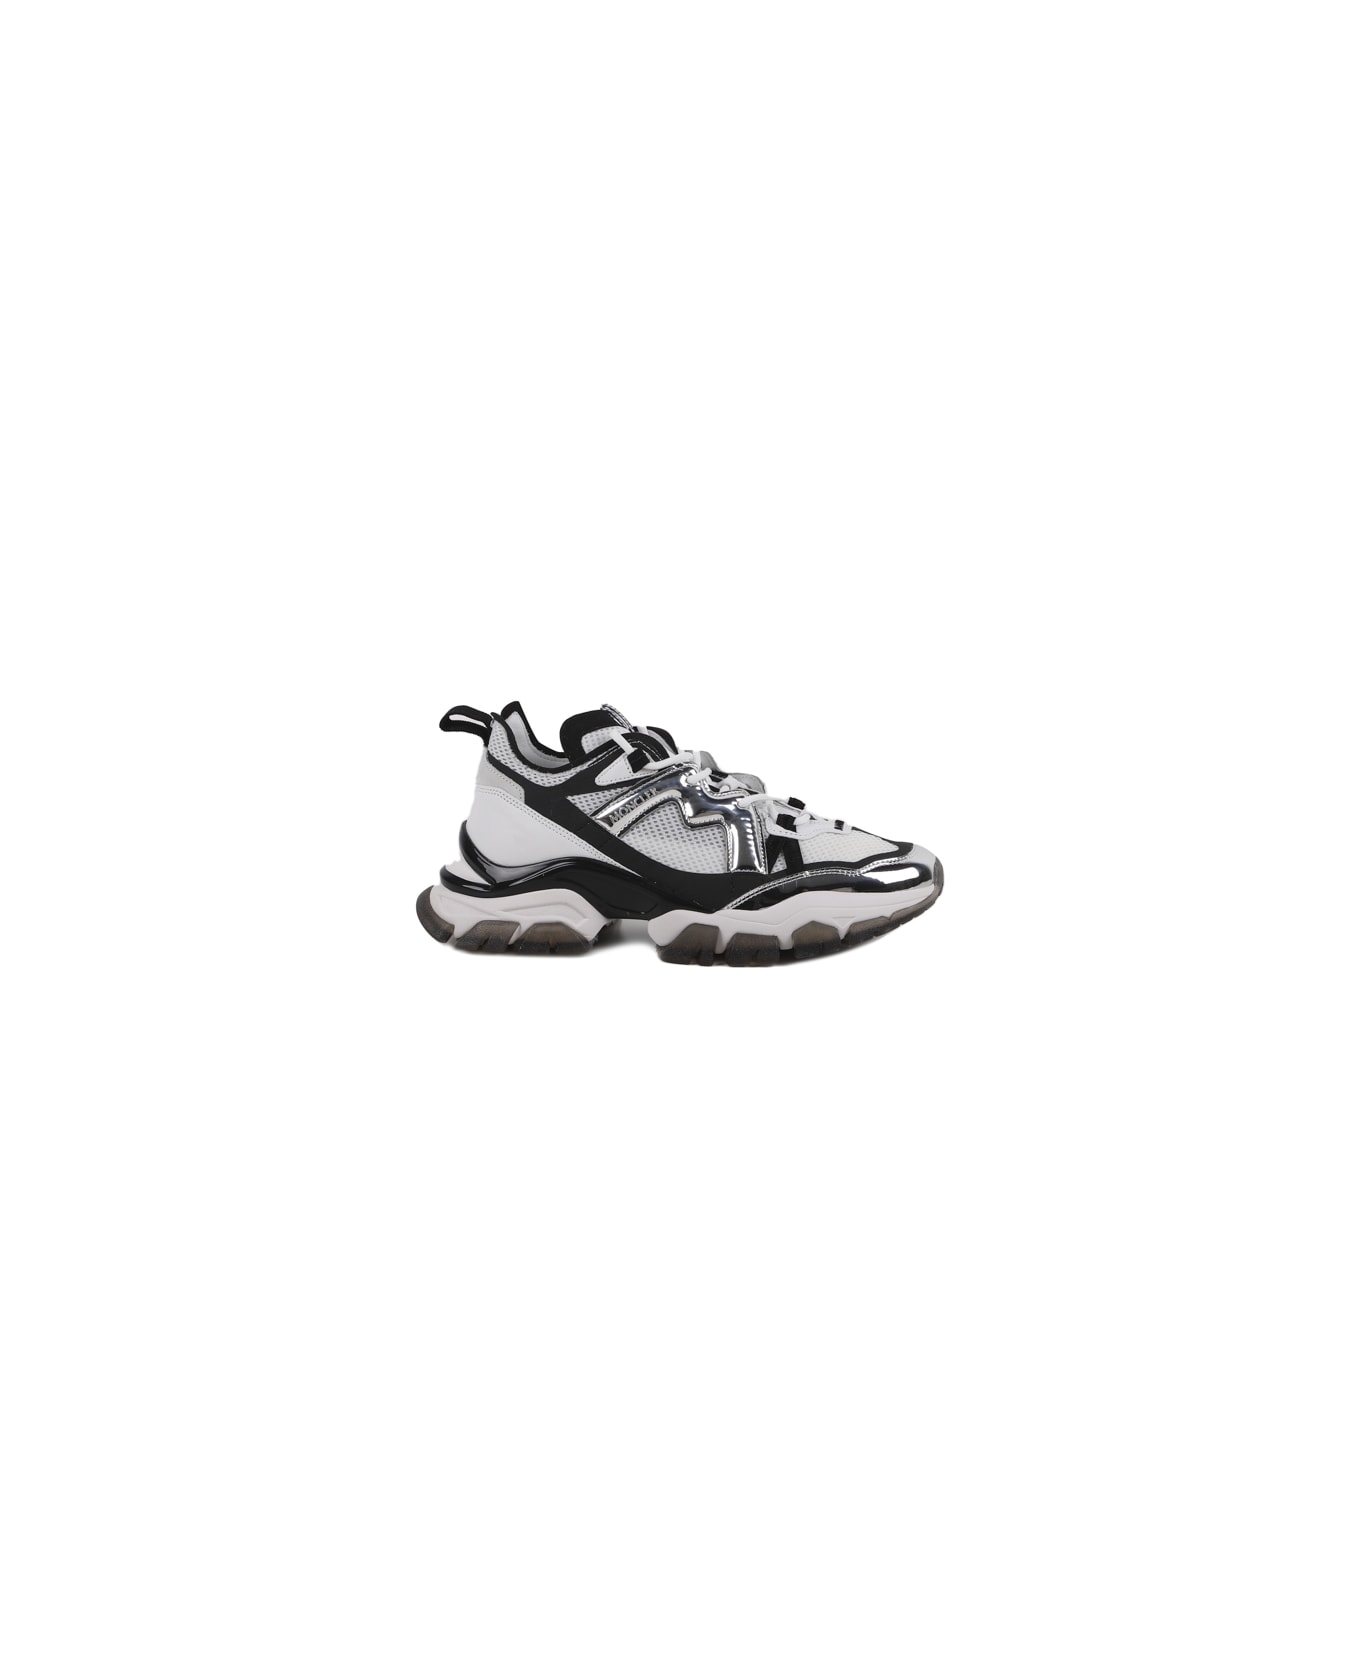 Moncler Leave No Trace Sneakers - White, black